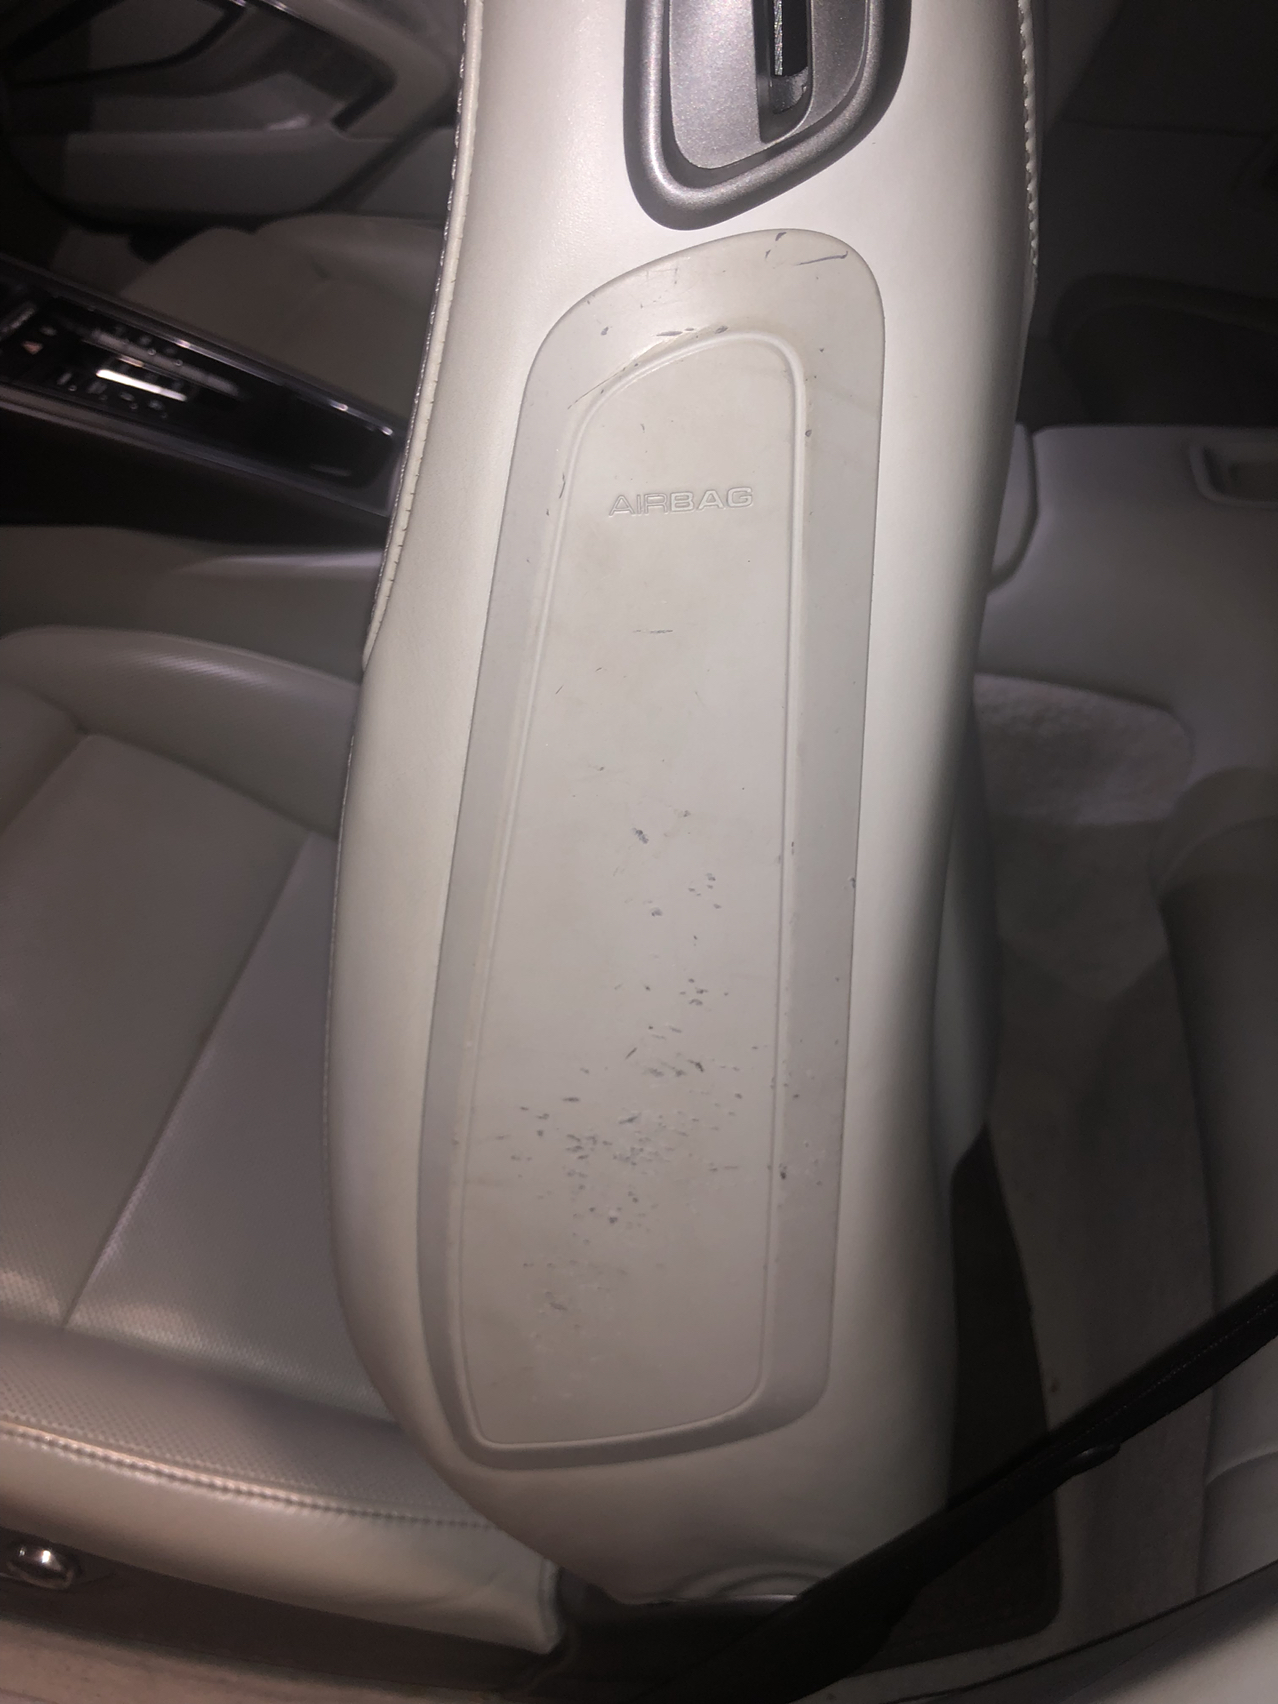 Seat Airbag cover - any repair advice? - Rennlist - Porsche Discussion ...